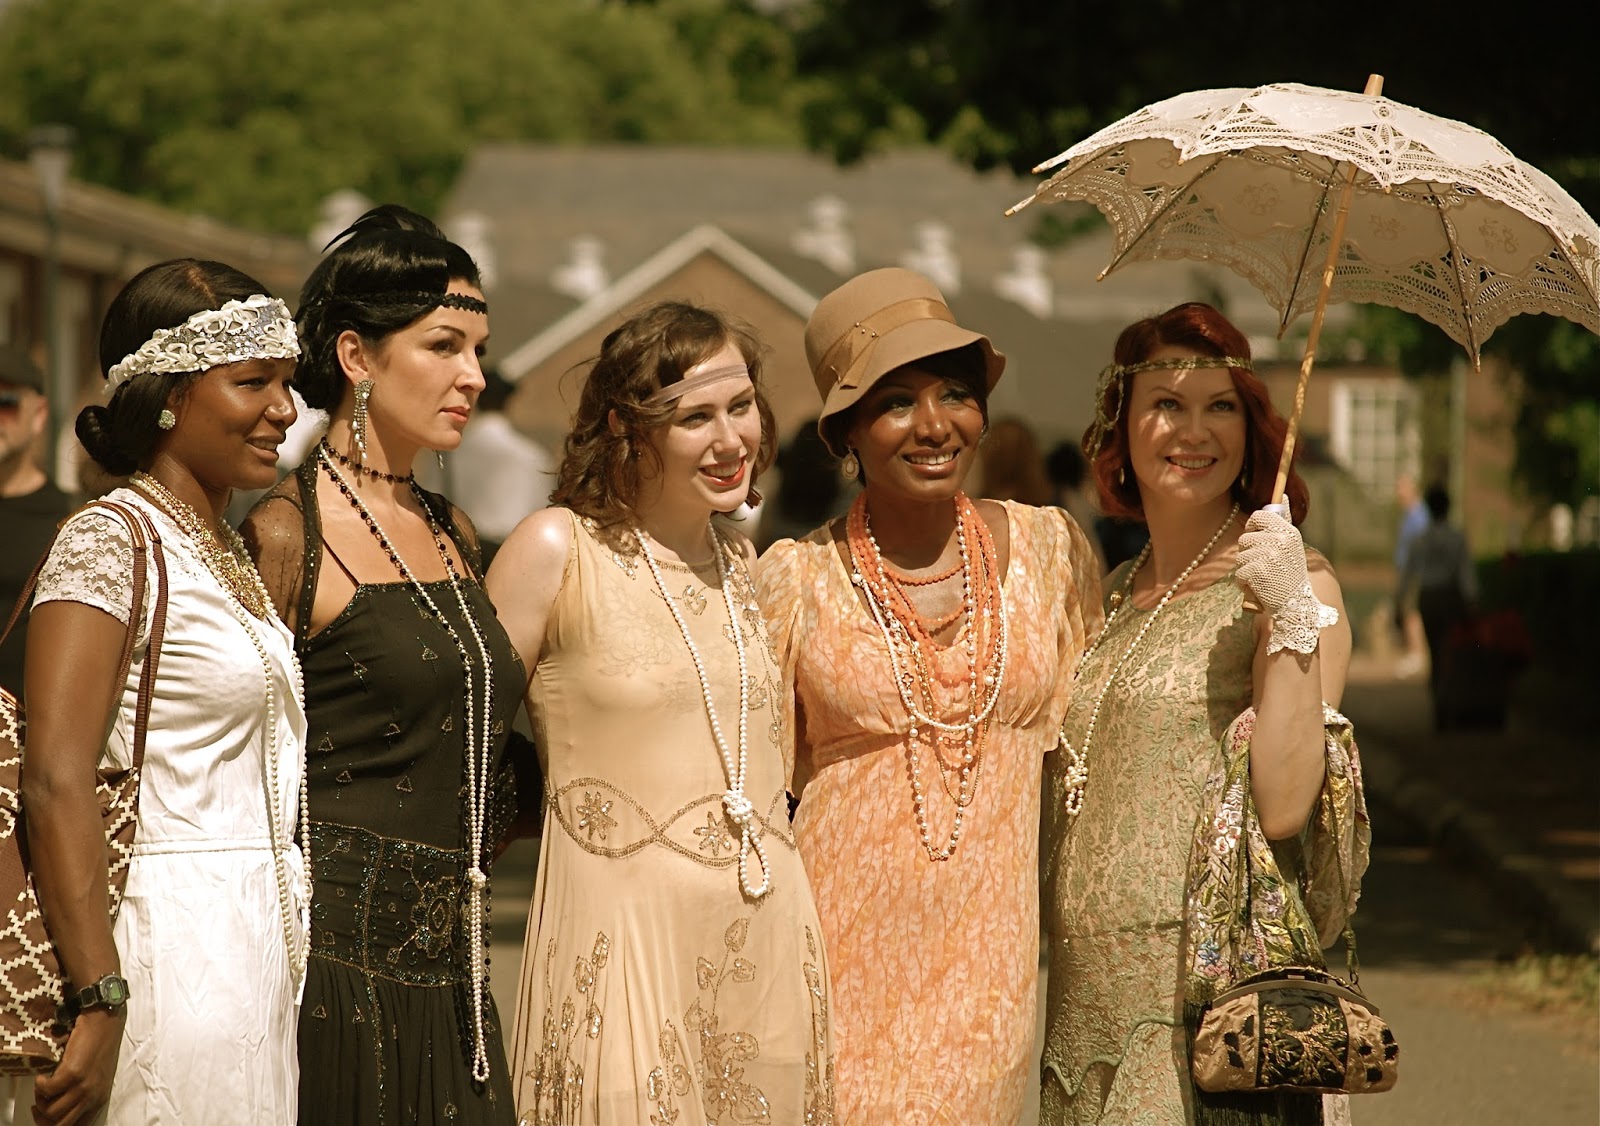 NYC ♥ NYC: Gatsby-Style Weekend - The Jazz Age Lawn Party On Governors ...